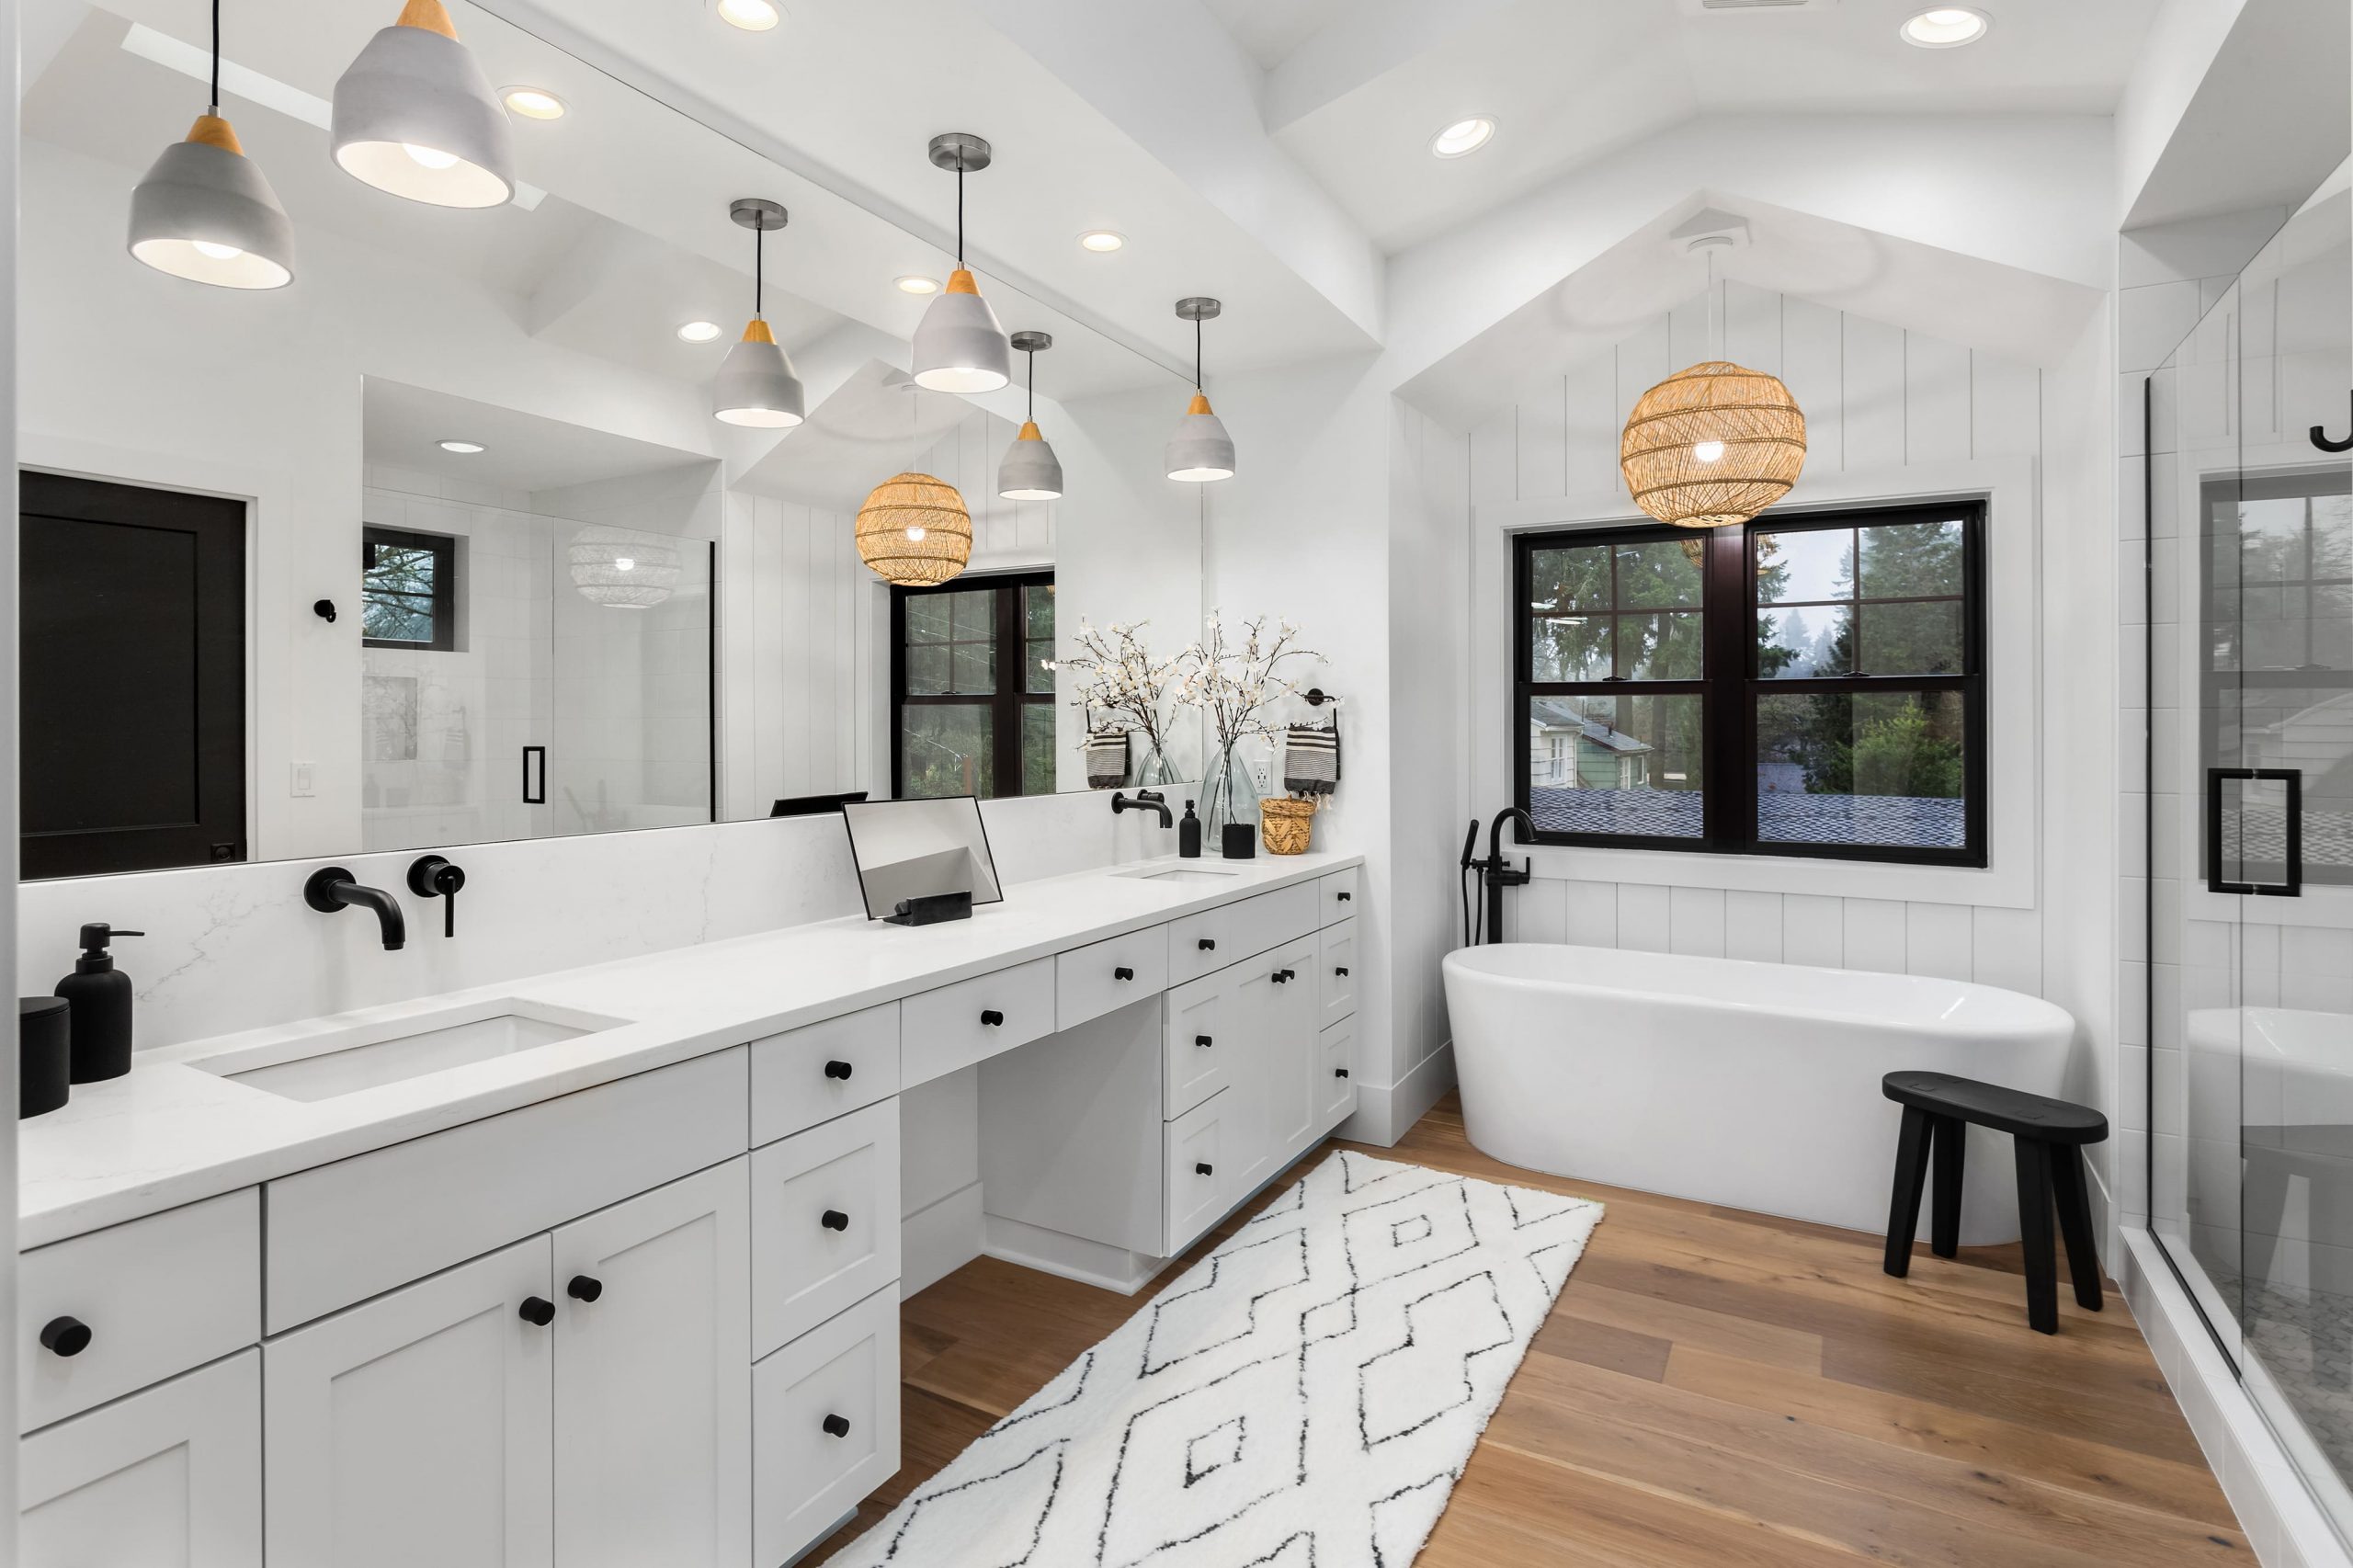 When it comes to maximizing the storage potential of your bathroom cabinets, shelving and hanging options are key. By utilizing these innovative solutions, you can create additional space for all your bathroom essentials.